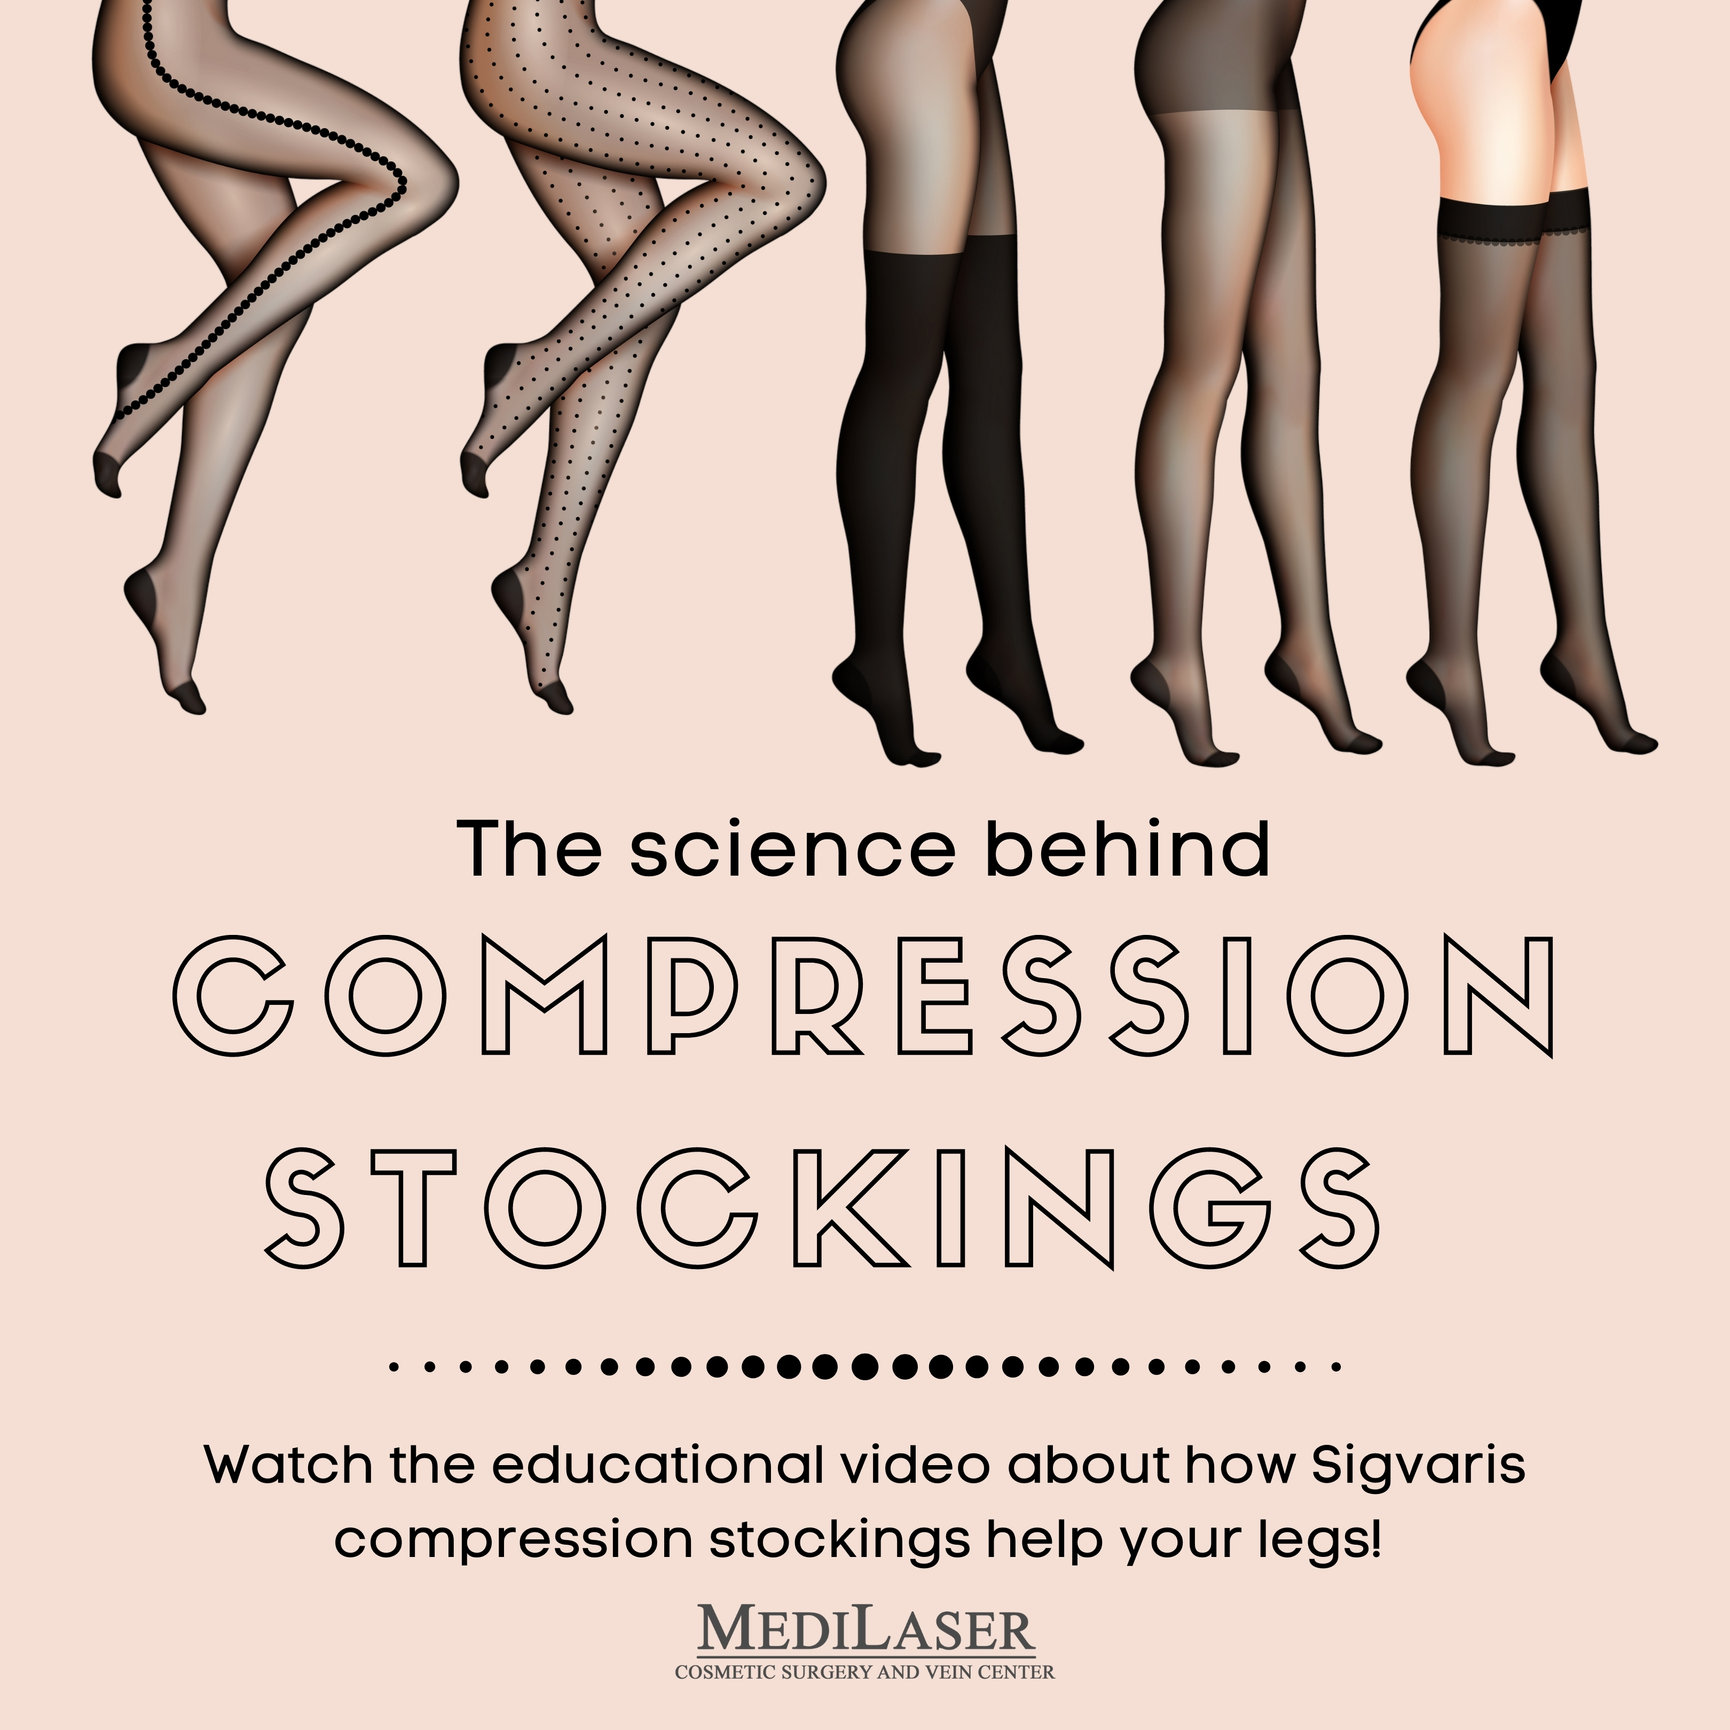 The Beneficial Effects Of Wearing SIGVARIS Compression Stockings. - Vein  Specialists of the Carolinas